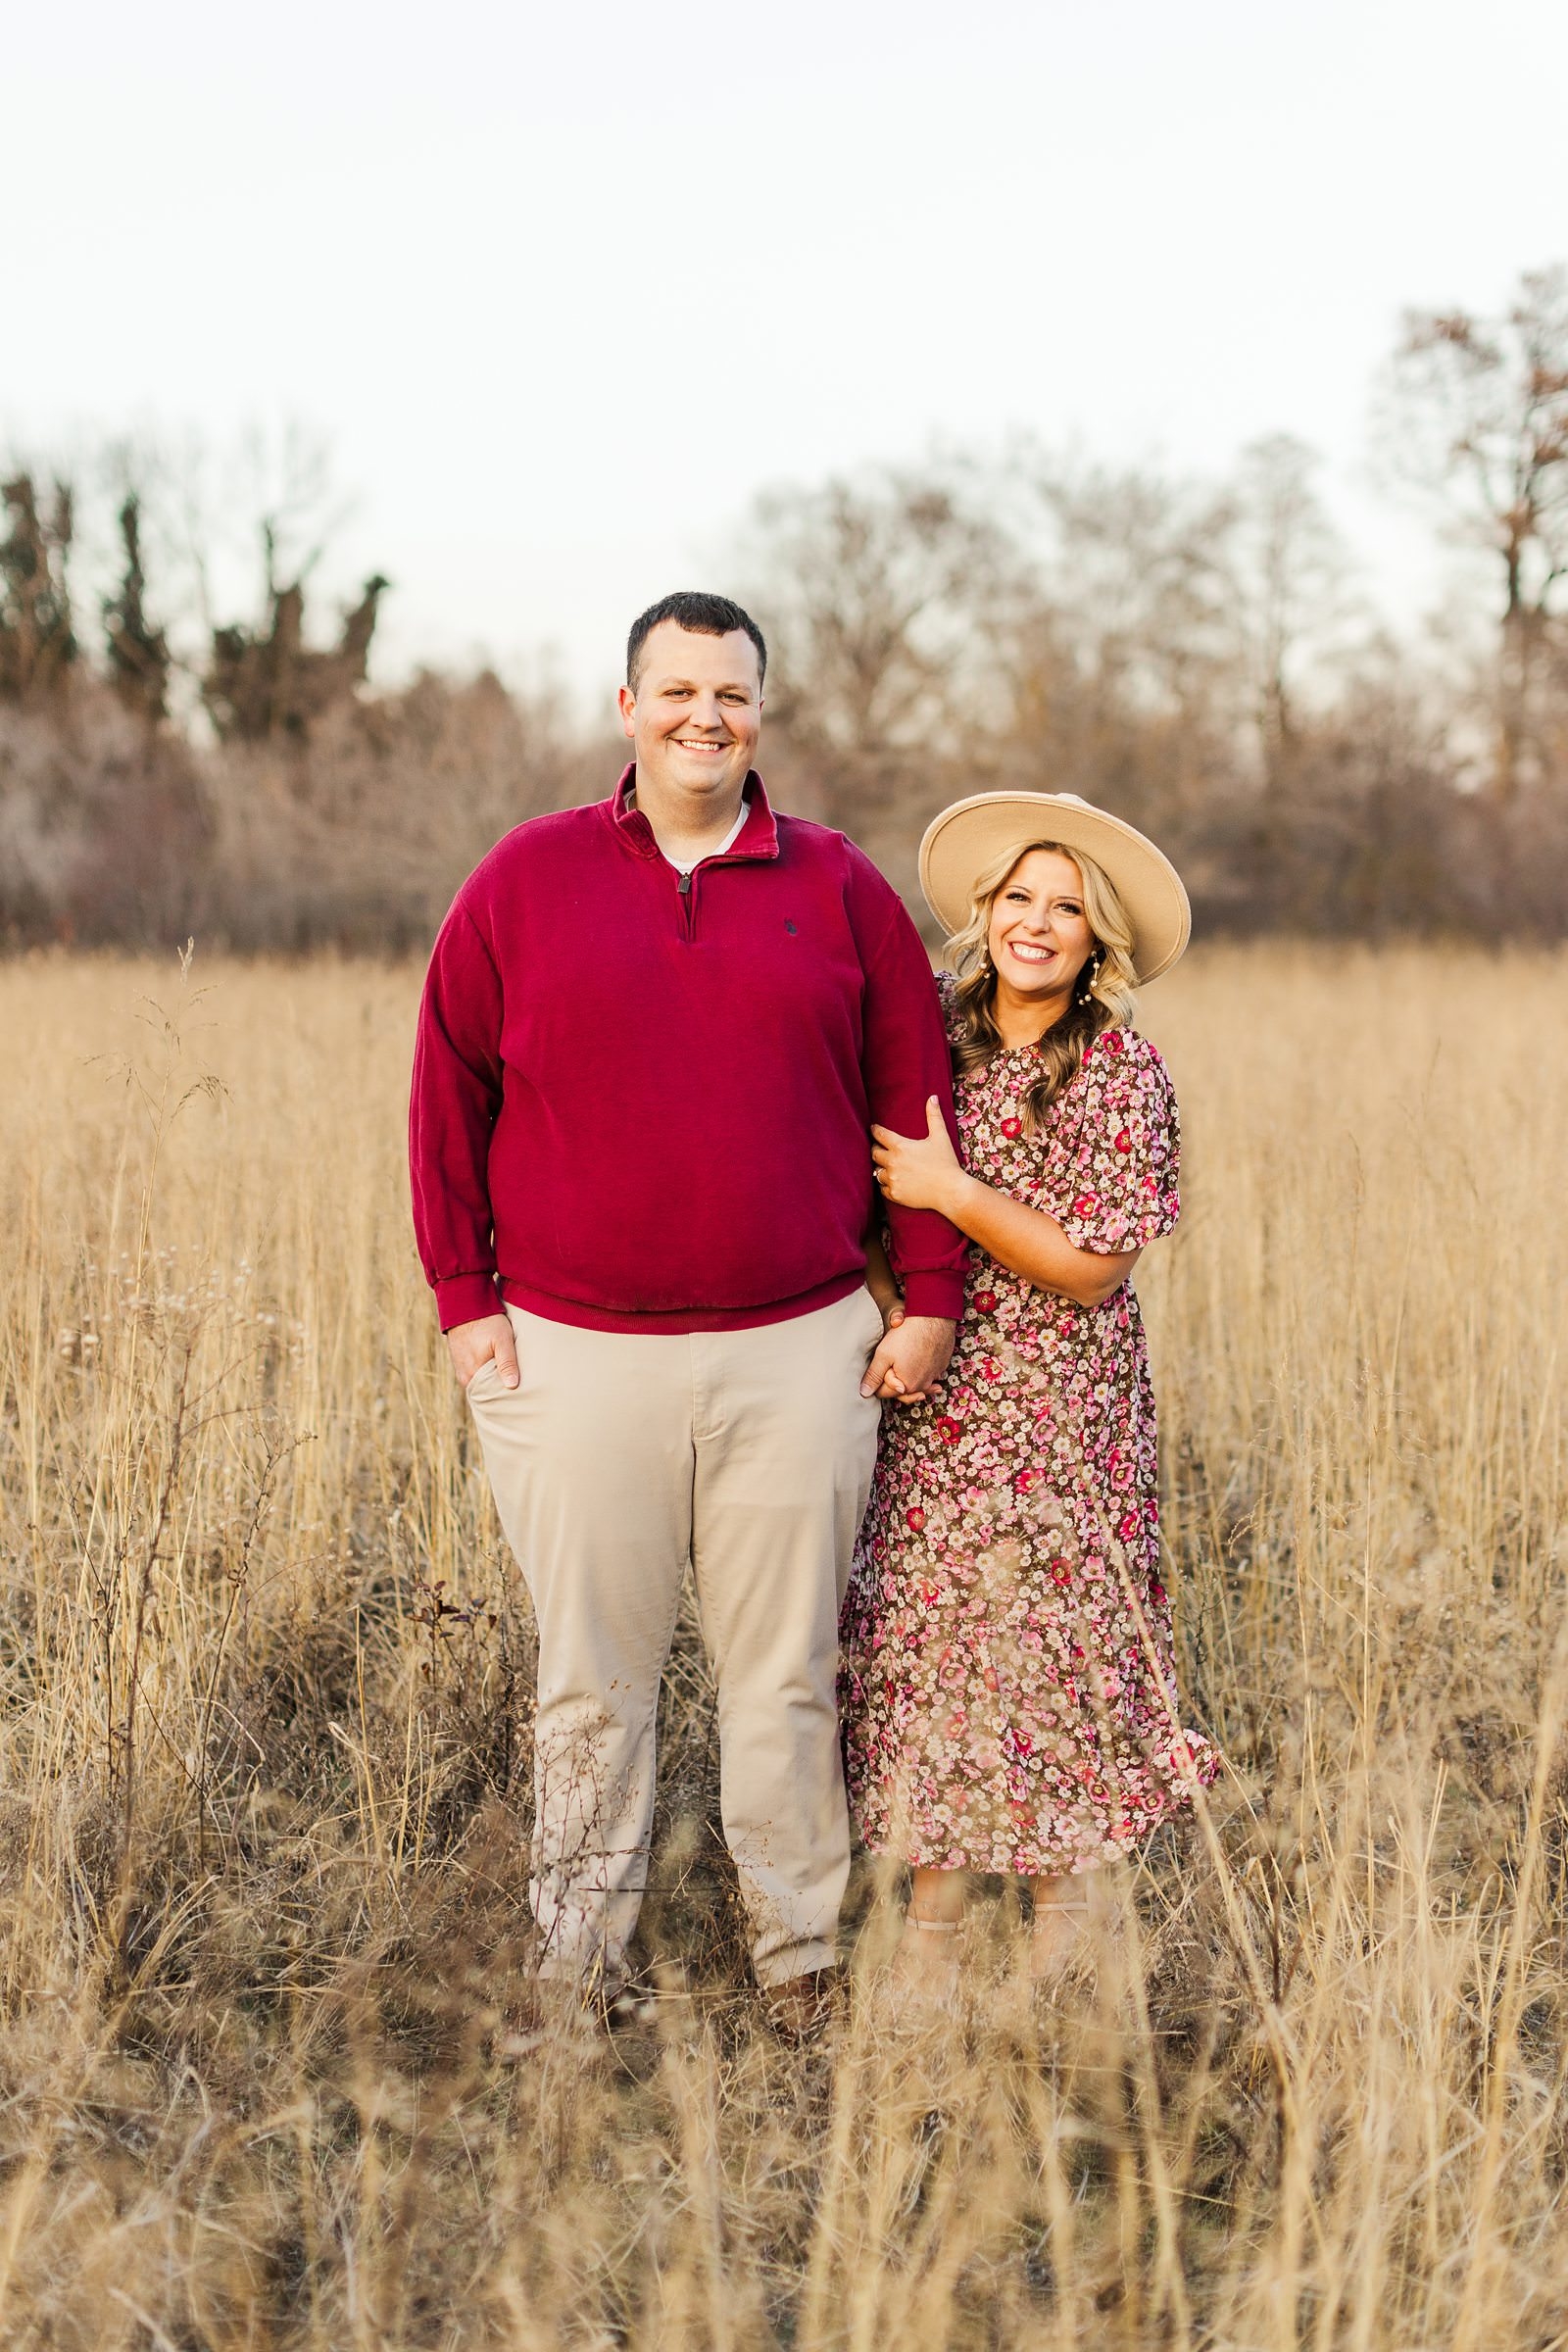 A Winter Downtown Newburgh Engagement Session | Paige and Dylan51.jpg